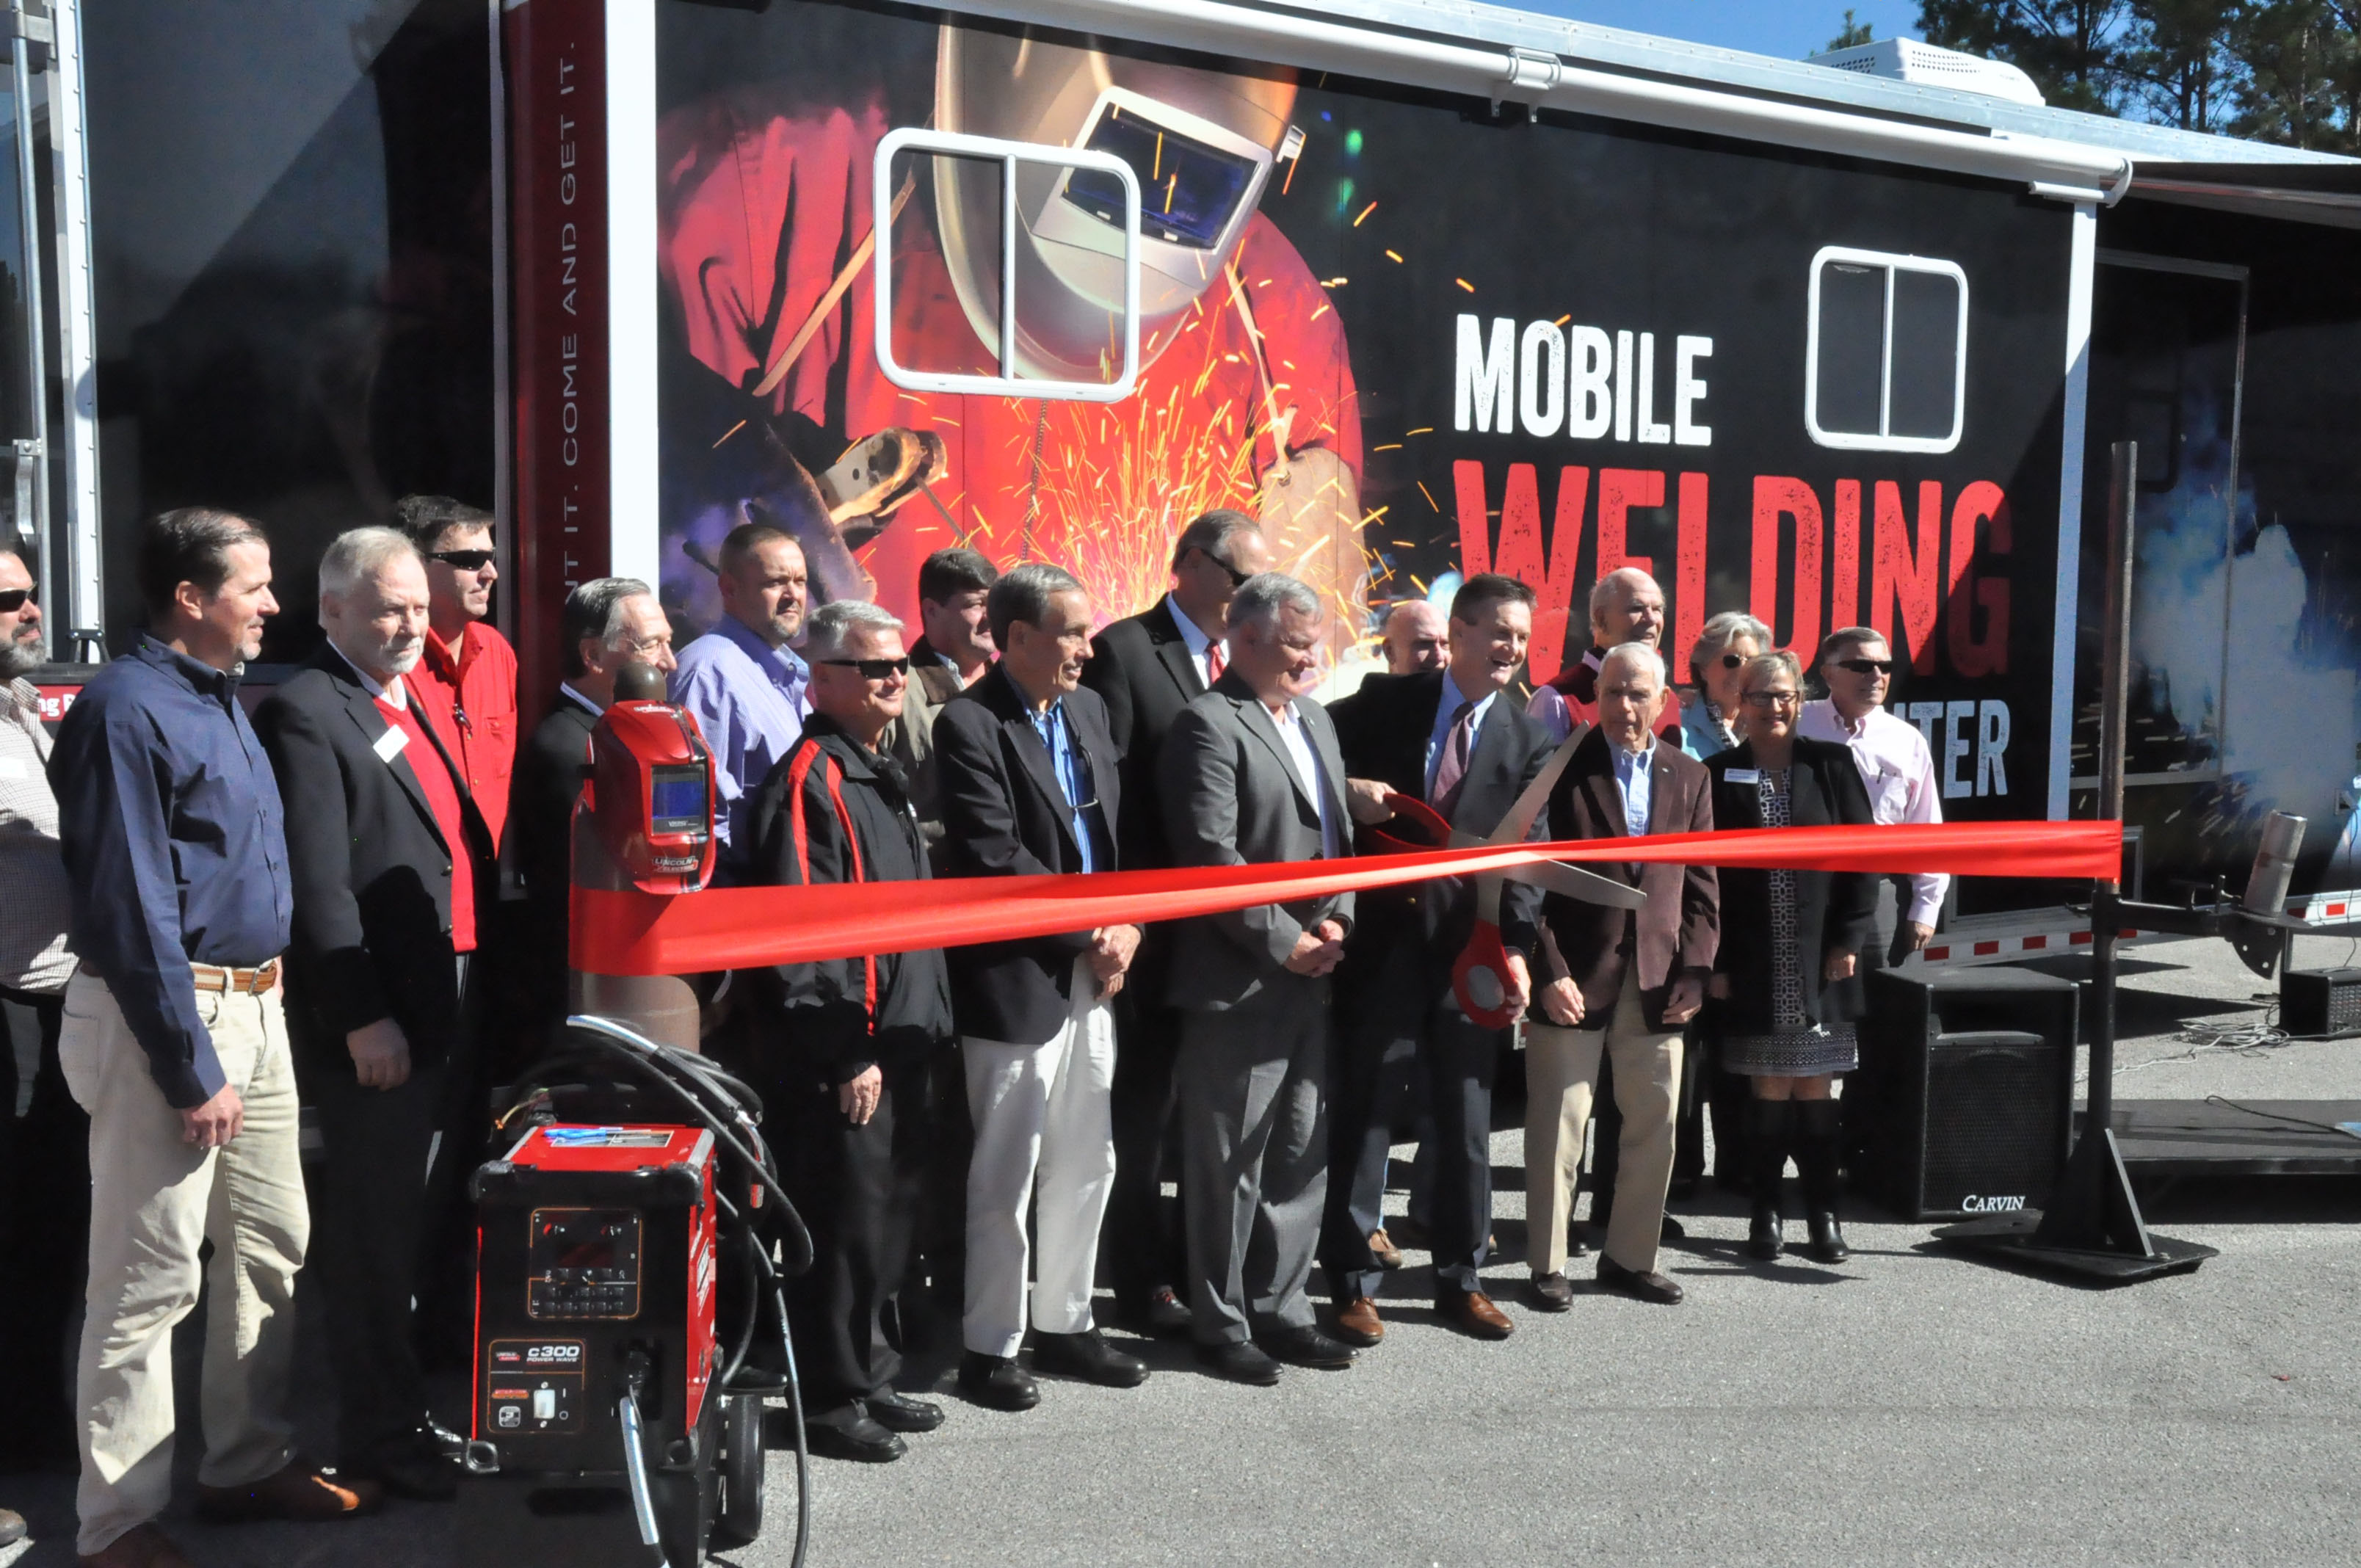 Ribbon Cutting Ceremony for TCL's Mobile Welding Program